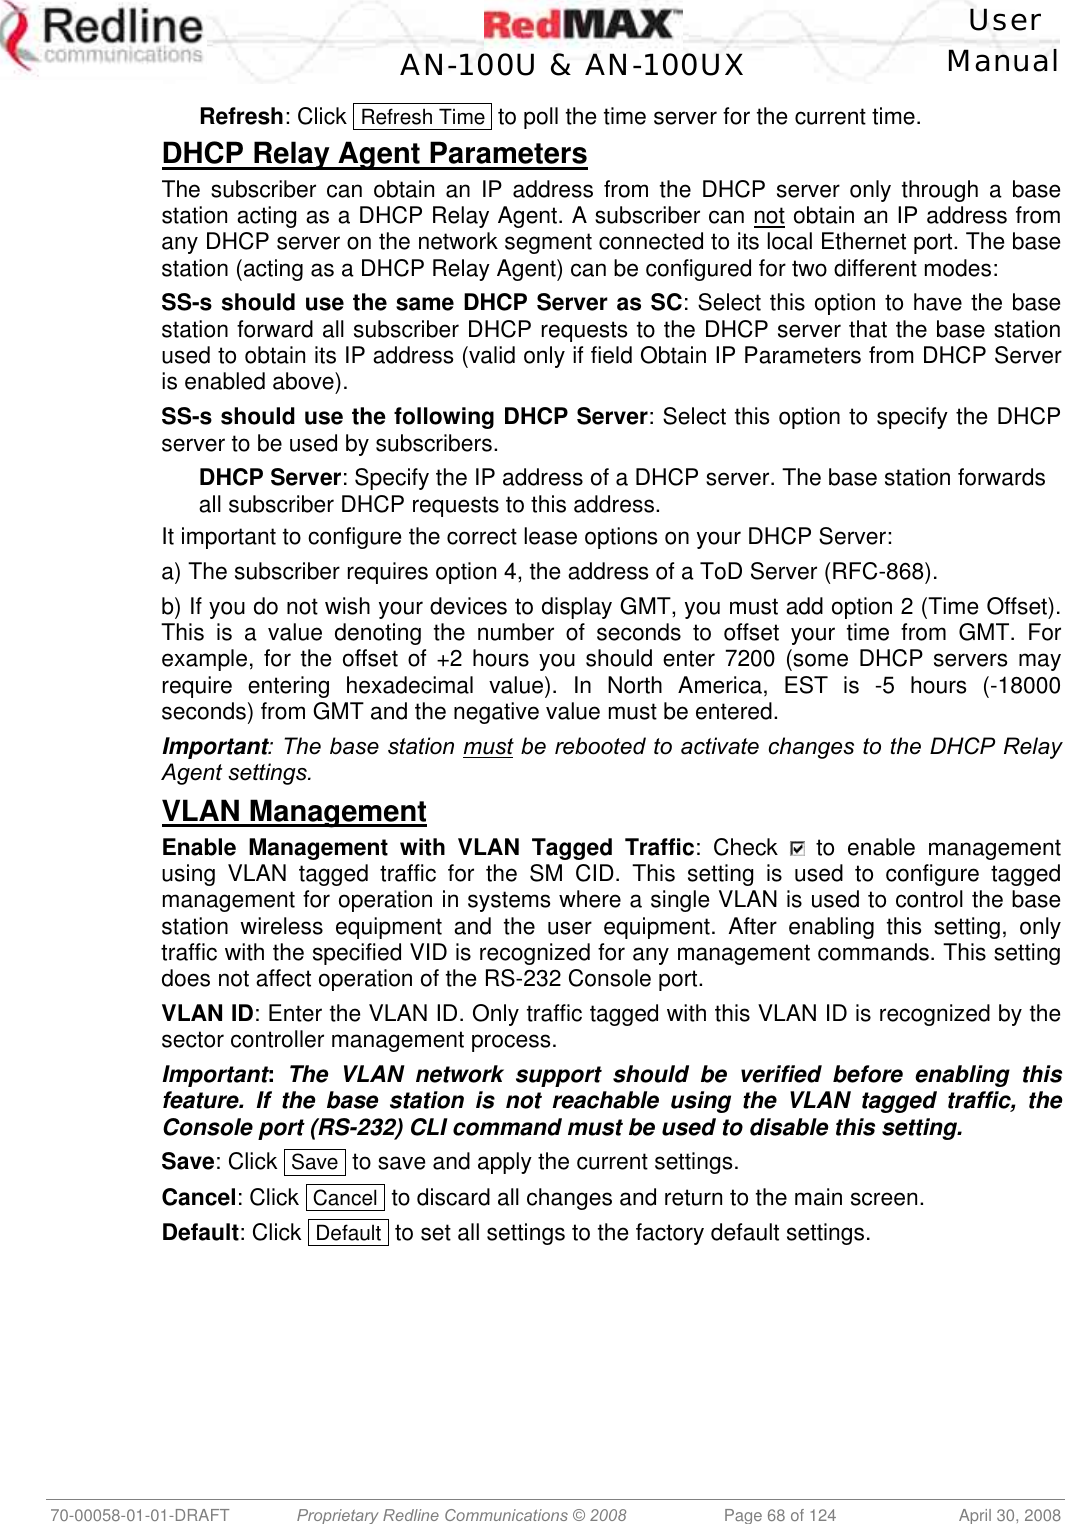    User  AN-100U &amp; AN-100UX Manual   70-00058-01-01-DRAFT  Proprietary Redline Communications © 2008   Page 68 of 124  April 30, 2008 Refresh: Click  Refresh Time  to poll the time server for the current time. DHCP Relay Agent Parameters The subscriber can obtain an IP address from the DHCP server only through a base station acting as a DHCP Relay Agent. A subscriber can not obtain an IP address from any DHCP server on the network segment connected to its local Ethernet port. The base station (acting as a DHCP Relay Agent) can be configured for two different modes: SS-s should use the same DHCP Server as SC: Select this option to have the base station forward all subscriber DHCP requests to the DHCP server that the base station used to obtain its IP address (valid only if field Obtain IP Parameters from DHCP Server is enabled above). SS-s should use the following DHCP Server: Select this option to specify the DHCP server to be used by subscribers. DHCP Server: Specify the IP address of a DHCP server. The base station forwards all subscriber DHCP requests to this address.  It important to configure the correct lease options on your DHCP Server: a) The subscriber requires option 4, the address of a ToD Server (RFC-868). b) If you do not wish your devices to display GMT, you must add option 2 (Time Offset). This is a value denoting the number of seconds to offset your time from GMT. For example, for the offset of +2 hours you should enter 7200 (some DHCP servers may require entering hexadecimal value). In North America, EST is -5 hours (-18000 seconds) from GMT and the negative value must be entered. Important: The base station must be rebooted to activate changes to the DHCP Relay Agent settings. VLAN Management Enable Management with VLAN Tagged Traffic: Check   to enable management using VLAN tagged traffic for the SM CID. This setting is used to configure tagged management for operation in systems where a single VLAN is used to control the base station wireless equipment and the user equipment. After enabling this setting, only traffic with the specified VID is recognized for any management commands. This setting does not affect operation of the RS-232 Console port. VLAN ID: Enter the VLAN ID. Only traffic tagged with this VLAN ID is recognized by the sector controller management process. Important: The VLAN network support should be verified before enabling this feature. If the base station is not reachable using the VLAN tagged traffic, the Console port (RS-232) CLI command must be used to disable this setting. Save: Click  Save  to save and apply the current settings. Cancel: Click  Cancel  to discard all changes and return to the main screen. Default: Click  Default  to set all settings to the factory default settings. 